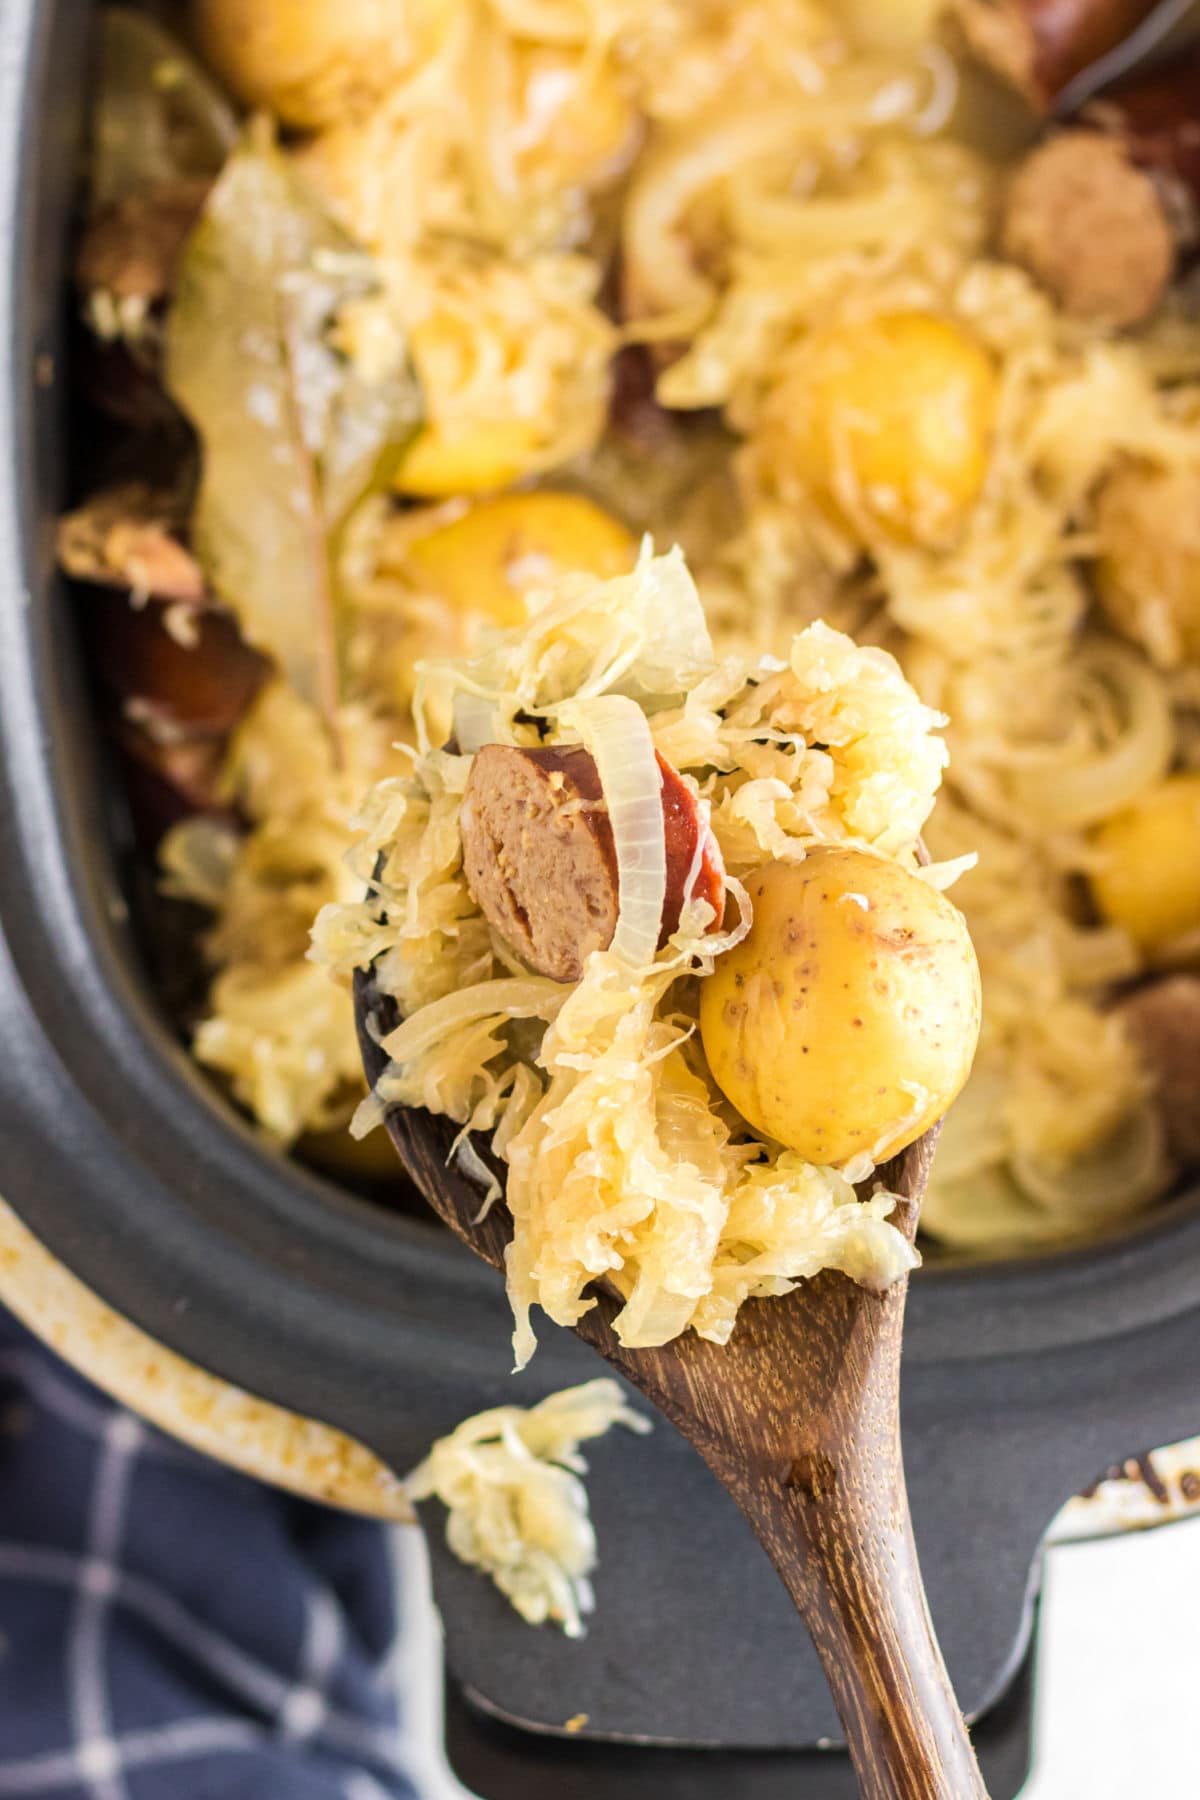 Kielbasa and sauerkraut with potatoes being spooned out of a slow cooker.